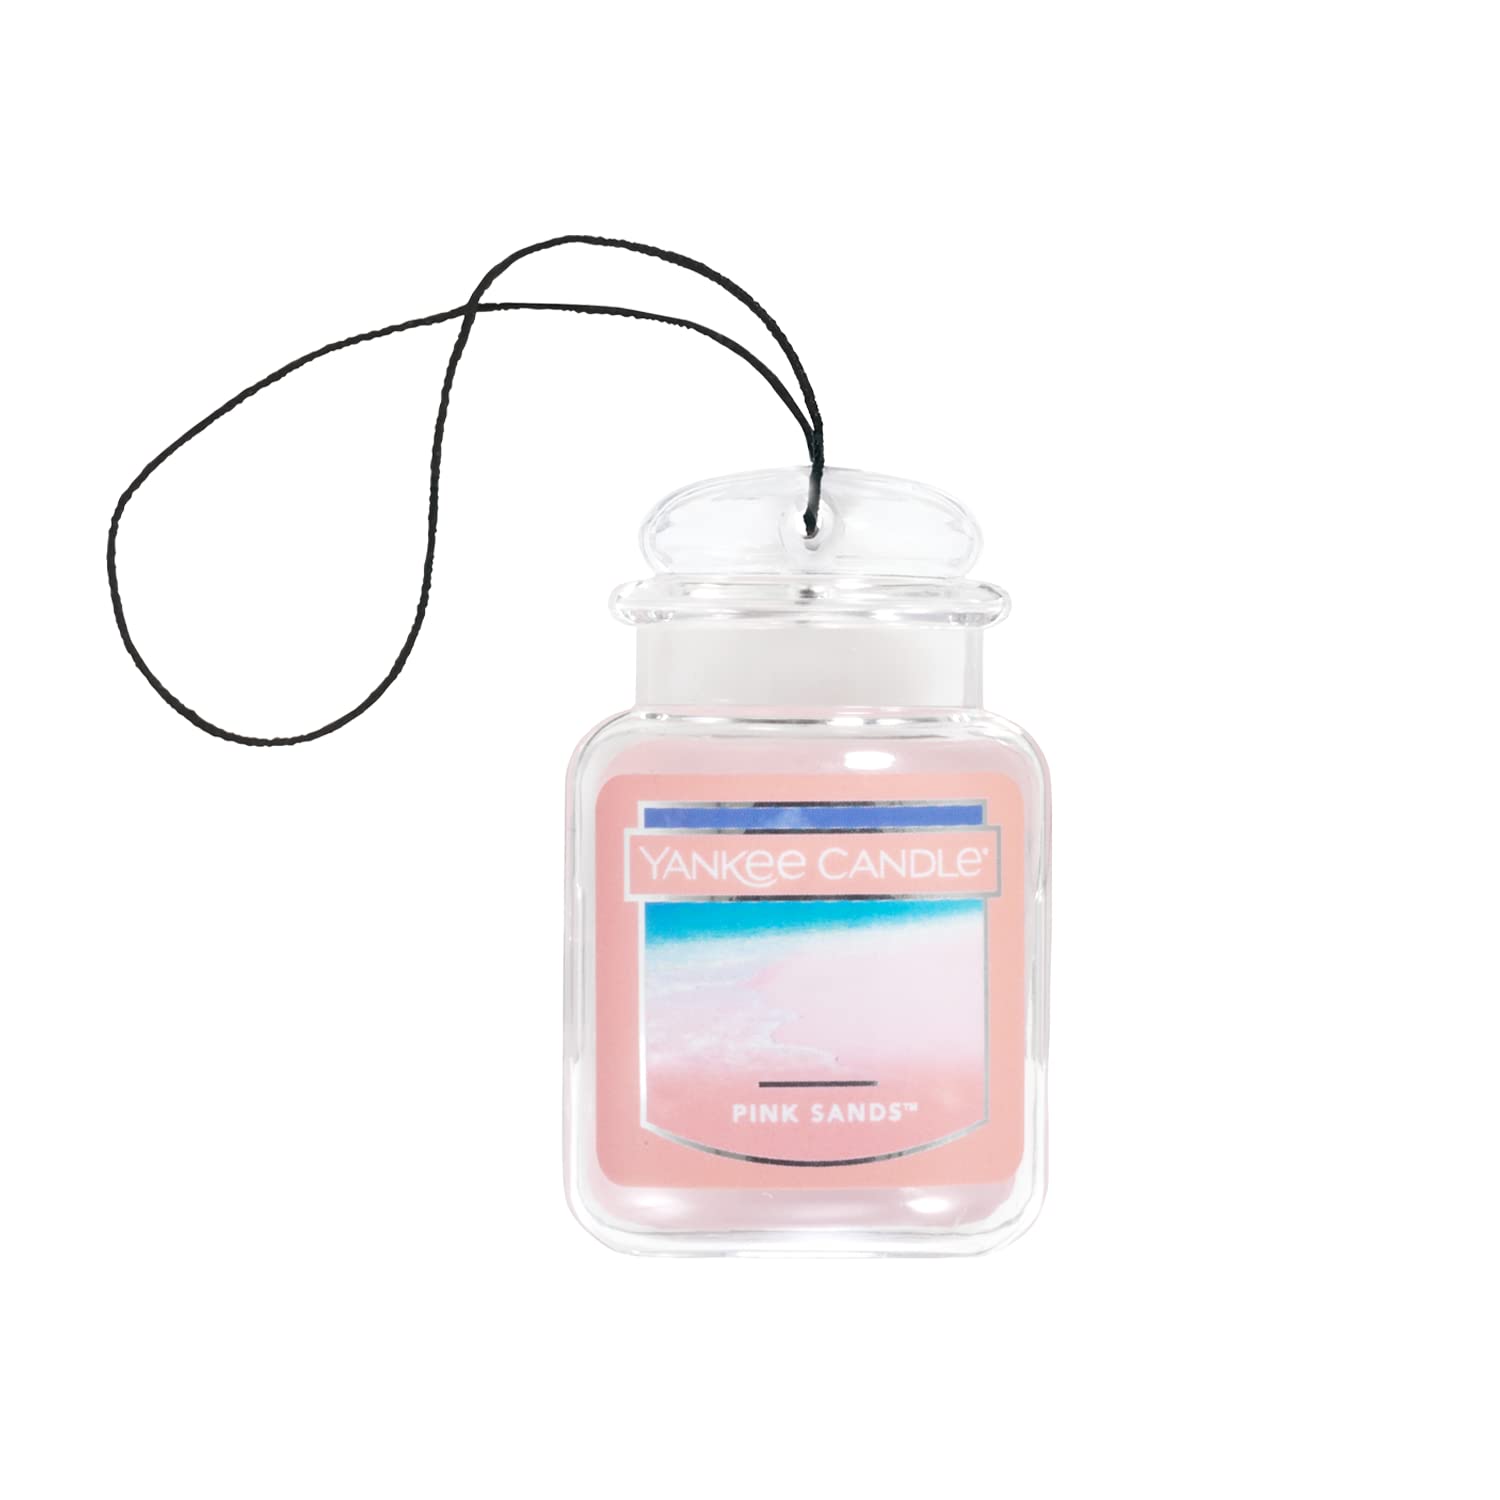 Yankee Candle Car Air Fresheners, Hanging Car Jar® Ultimate Pink Sands™ Scented, Neutralizes Odors Up To 30 Days